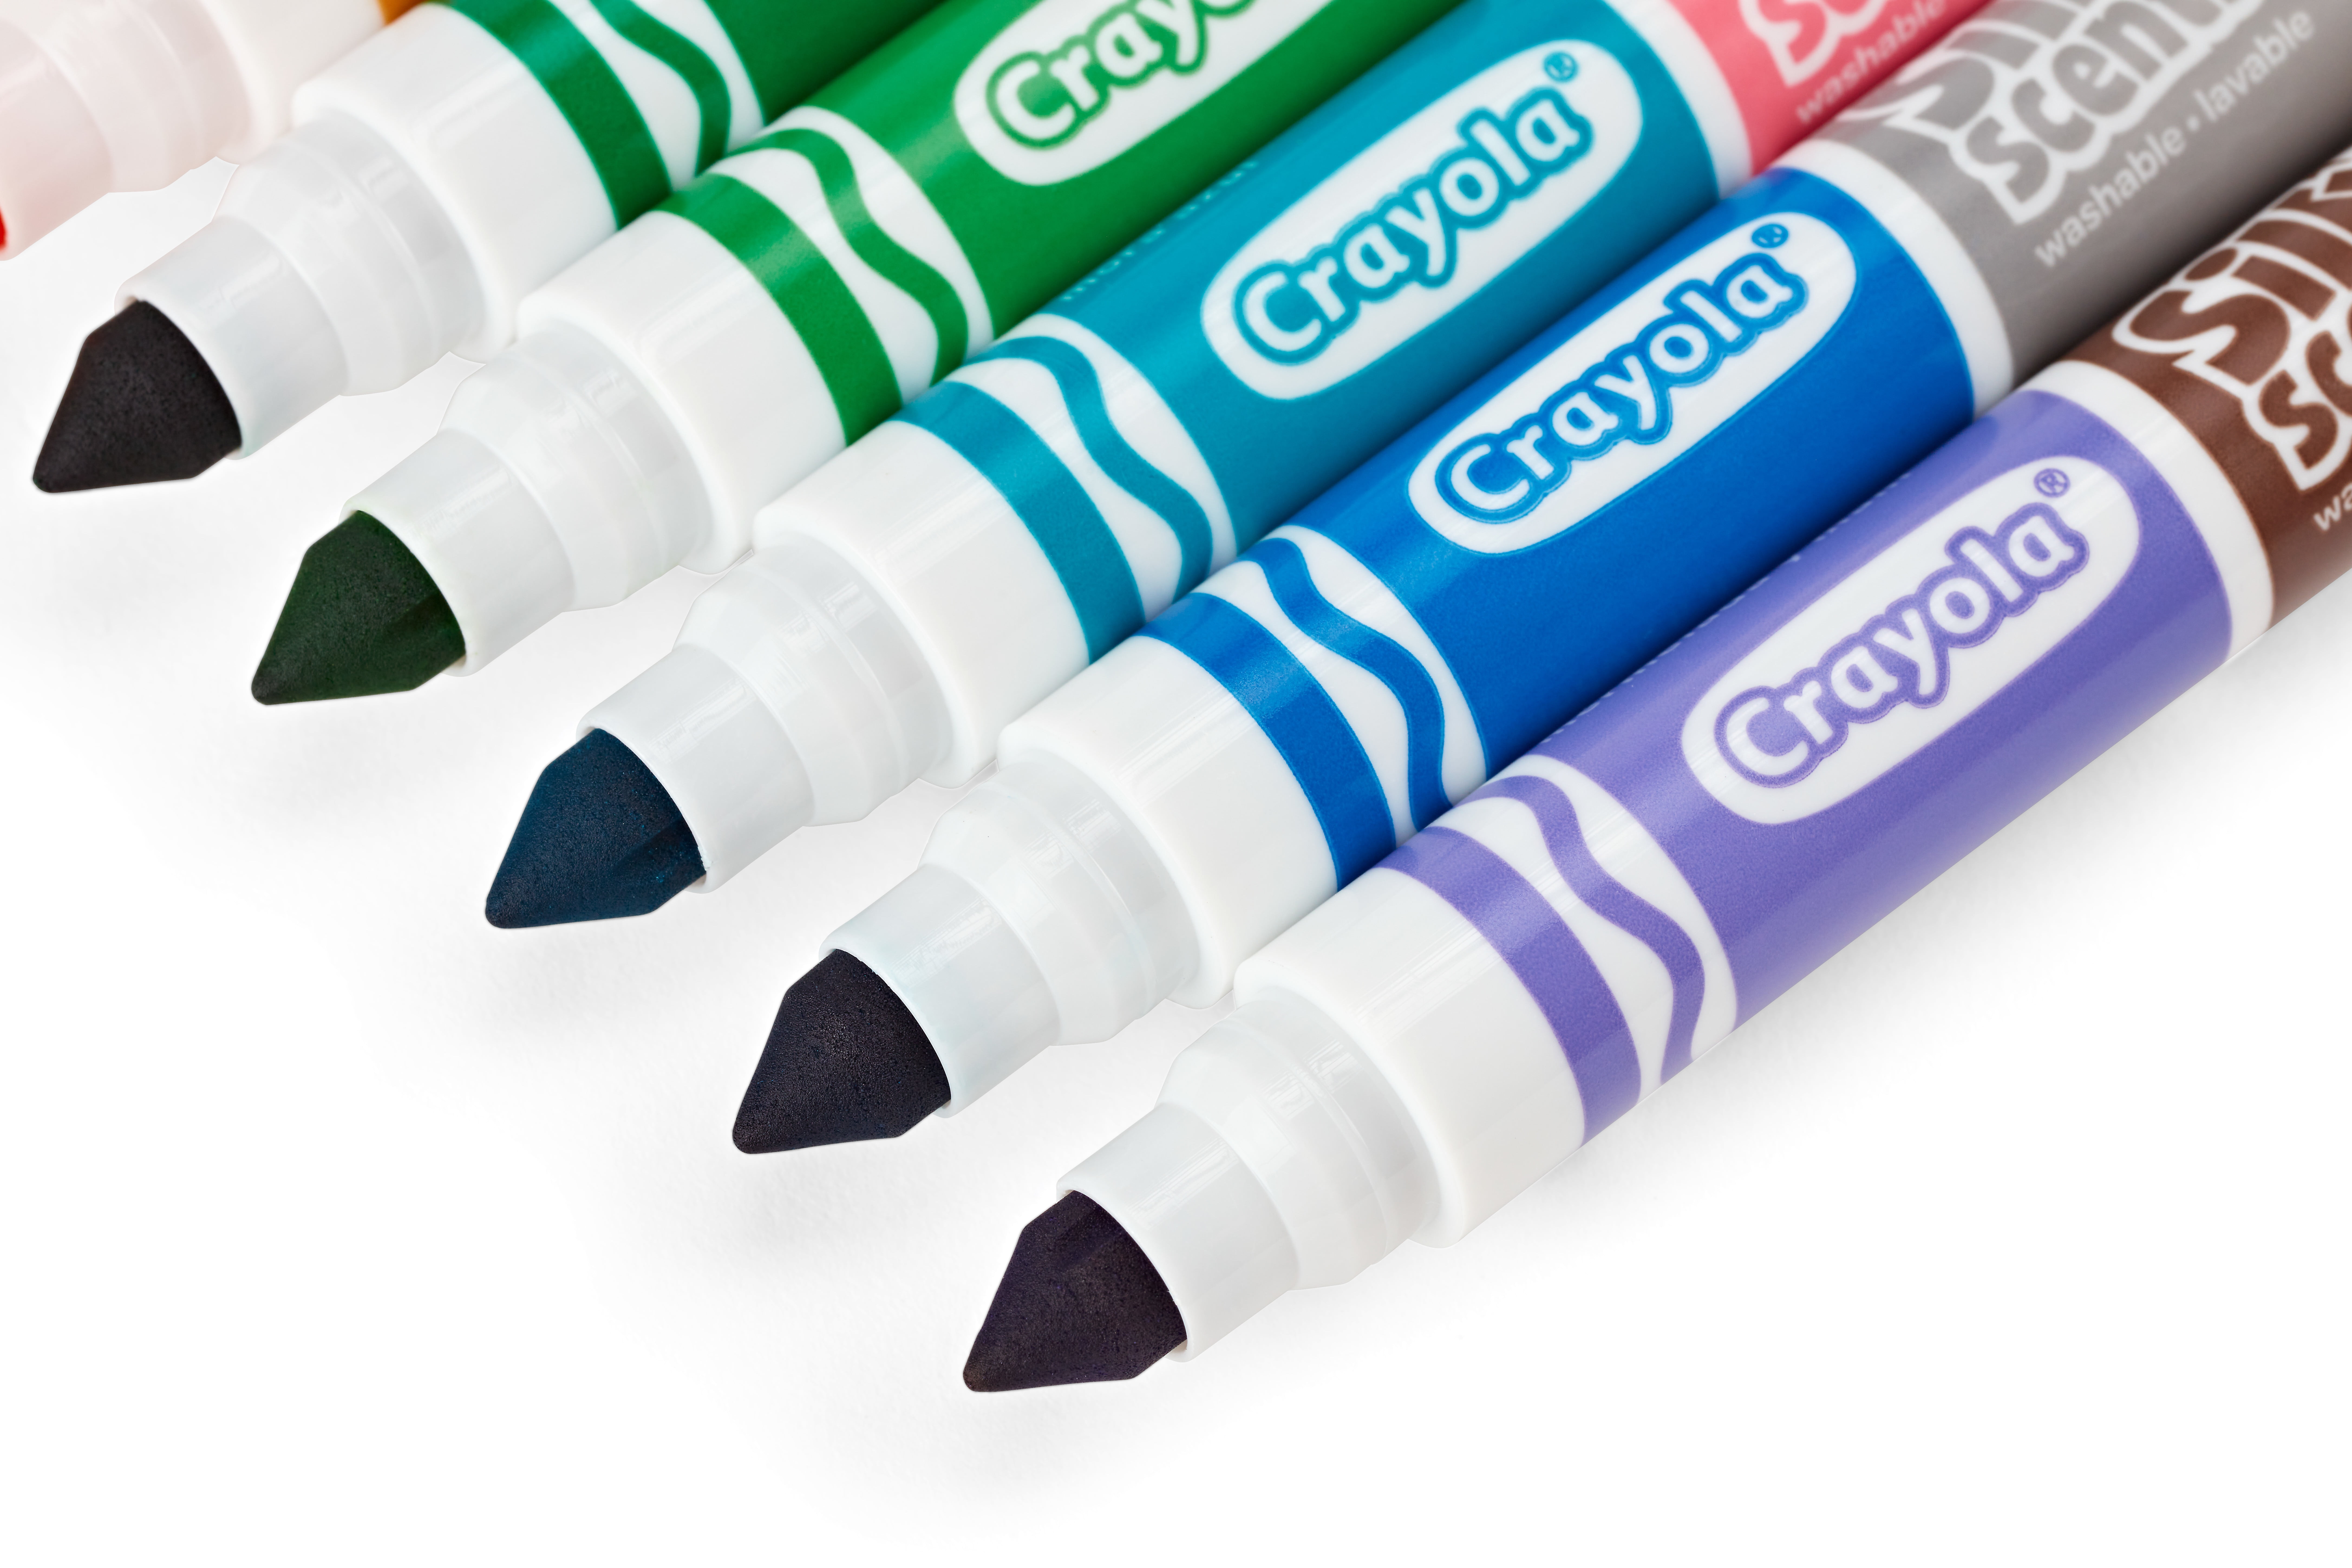 Crayola Marker Madness Variety Of Neon, Classic, And Scented Markers Buy 2  Save